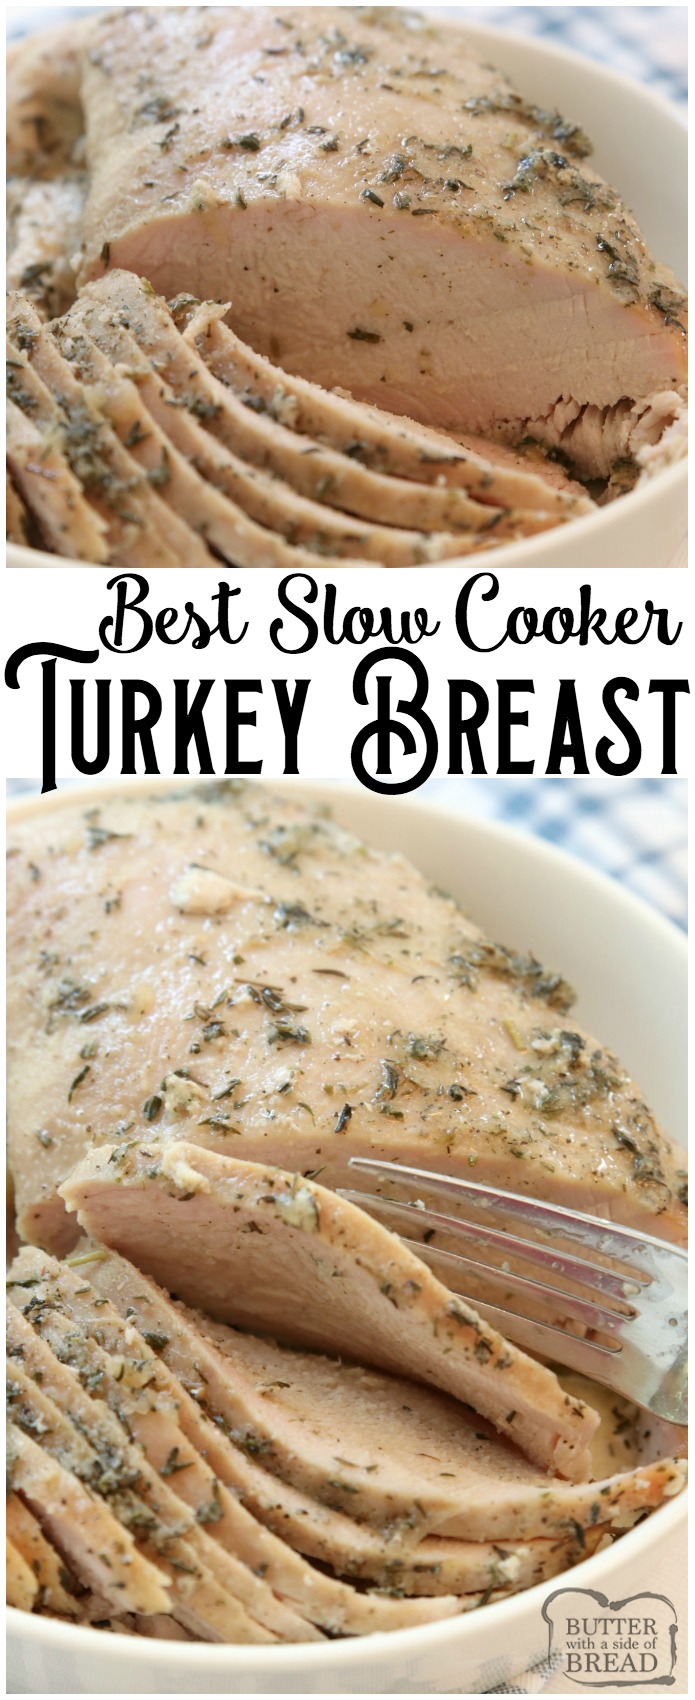 Easy Slow Cooker Turkey Breast recipe made with butter, a sliced apple and a basic mix of traditional seasonings. Crock pot turkey breast recipe perfect for any time of the year! #slowcooker #crockpot #turkey #turkeybreast #protein #recipe #dinner #food from BUTTER WITH A SIDE OF BREAD